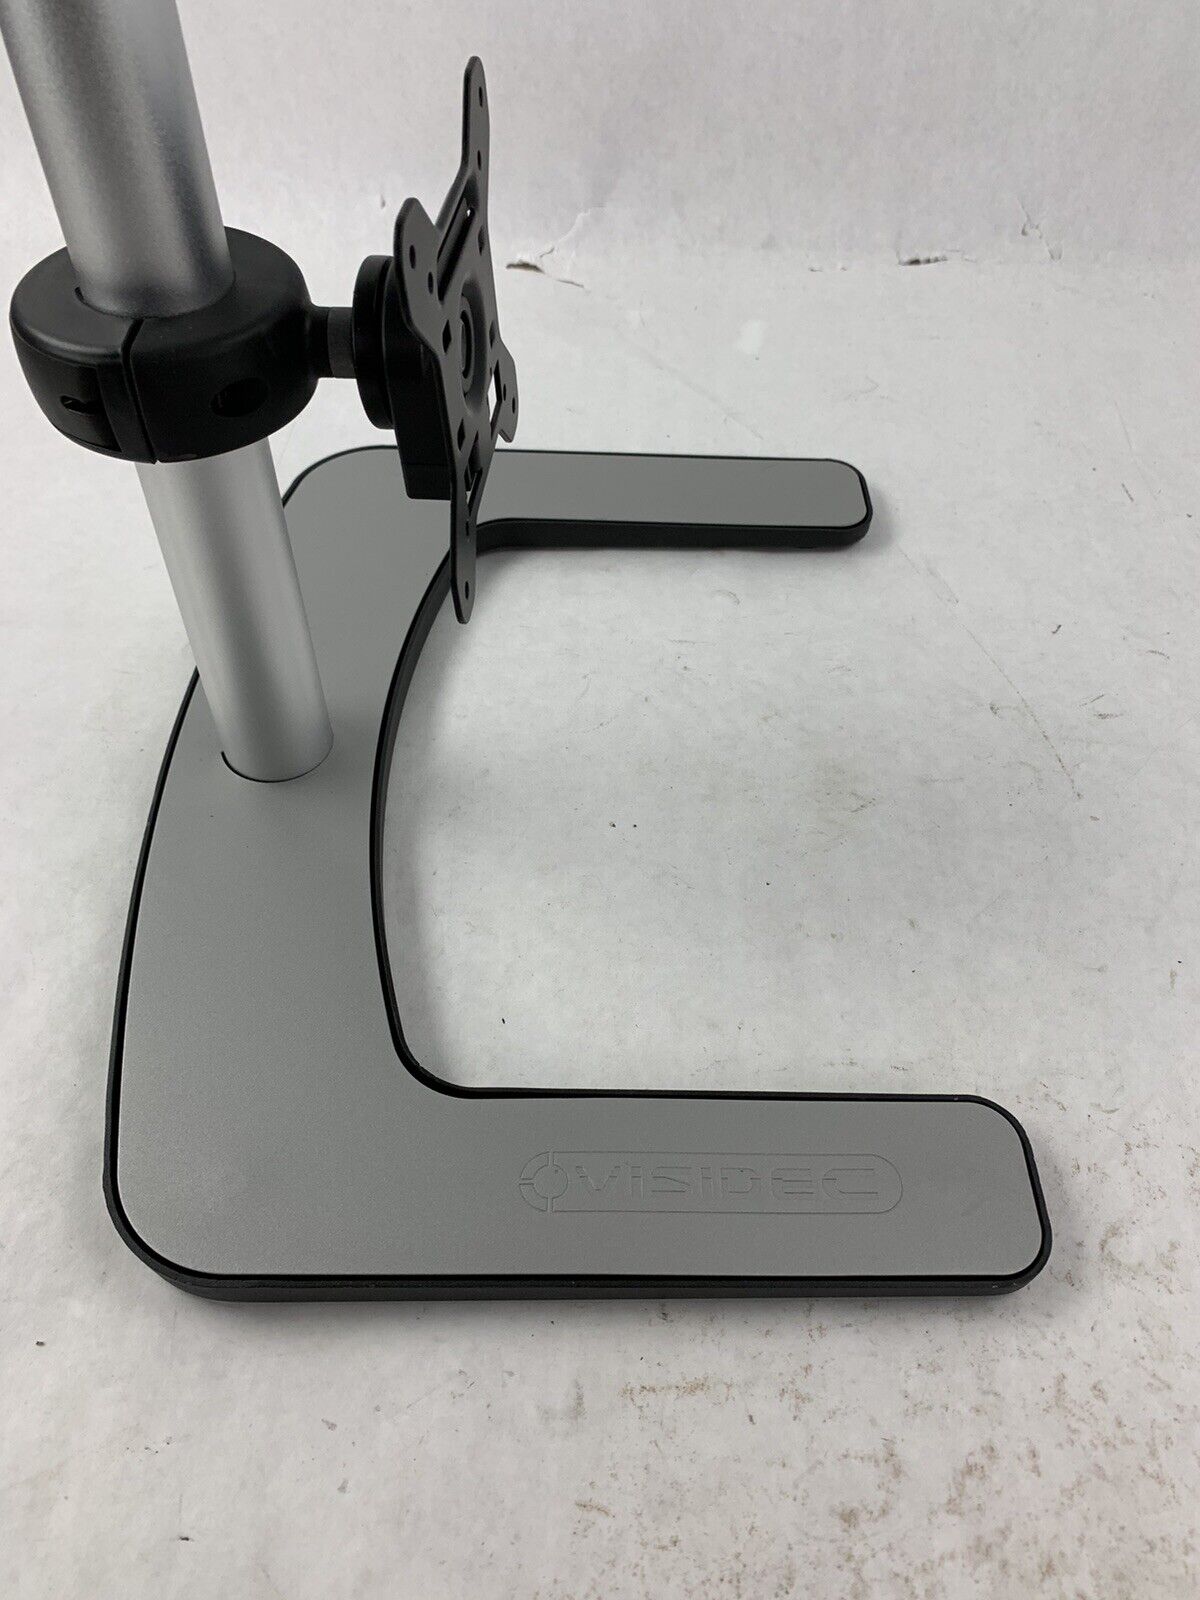 Visidec Dual Monitor Stand